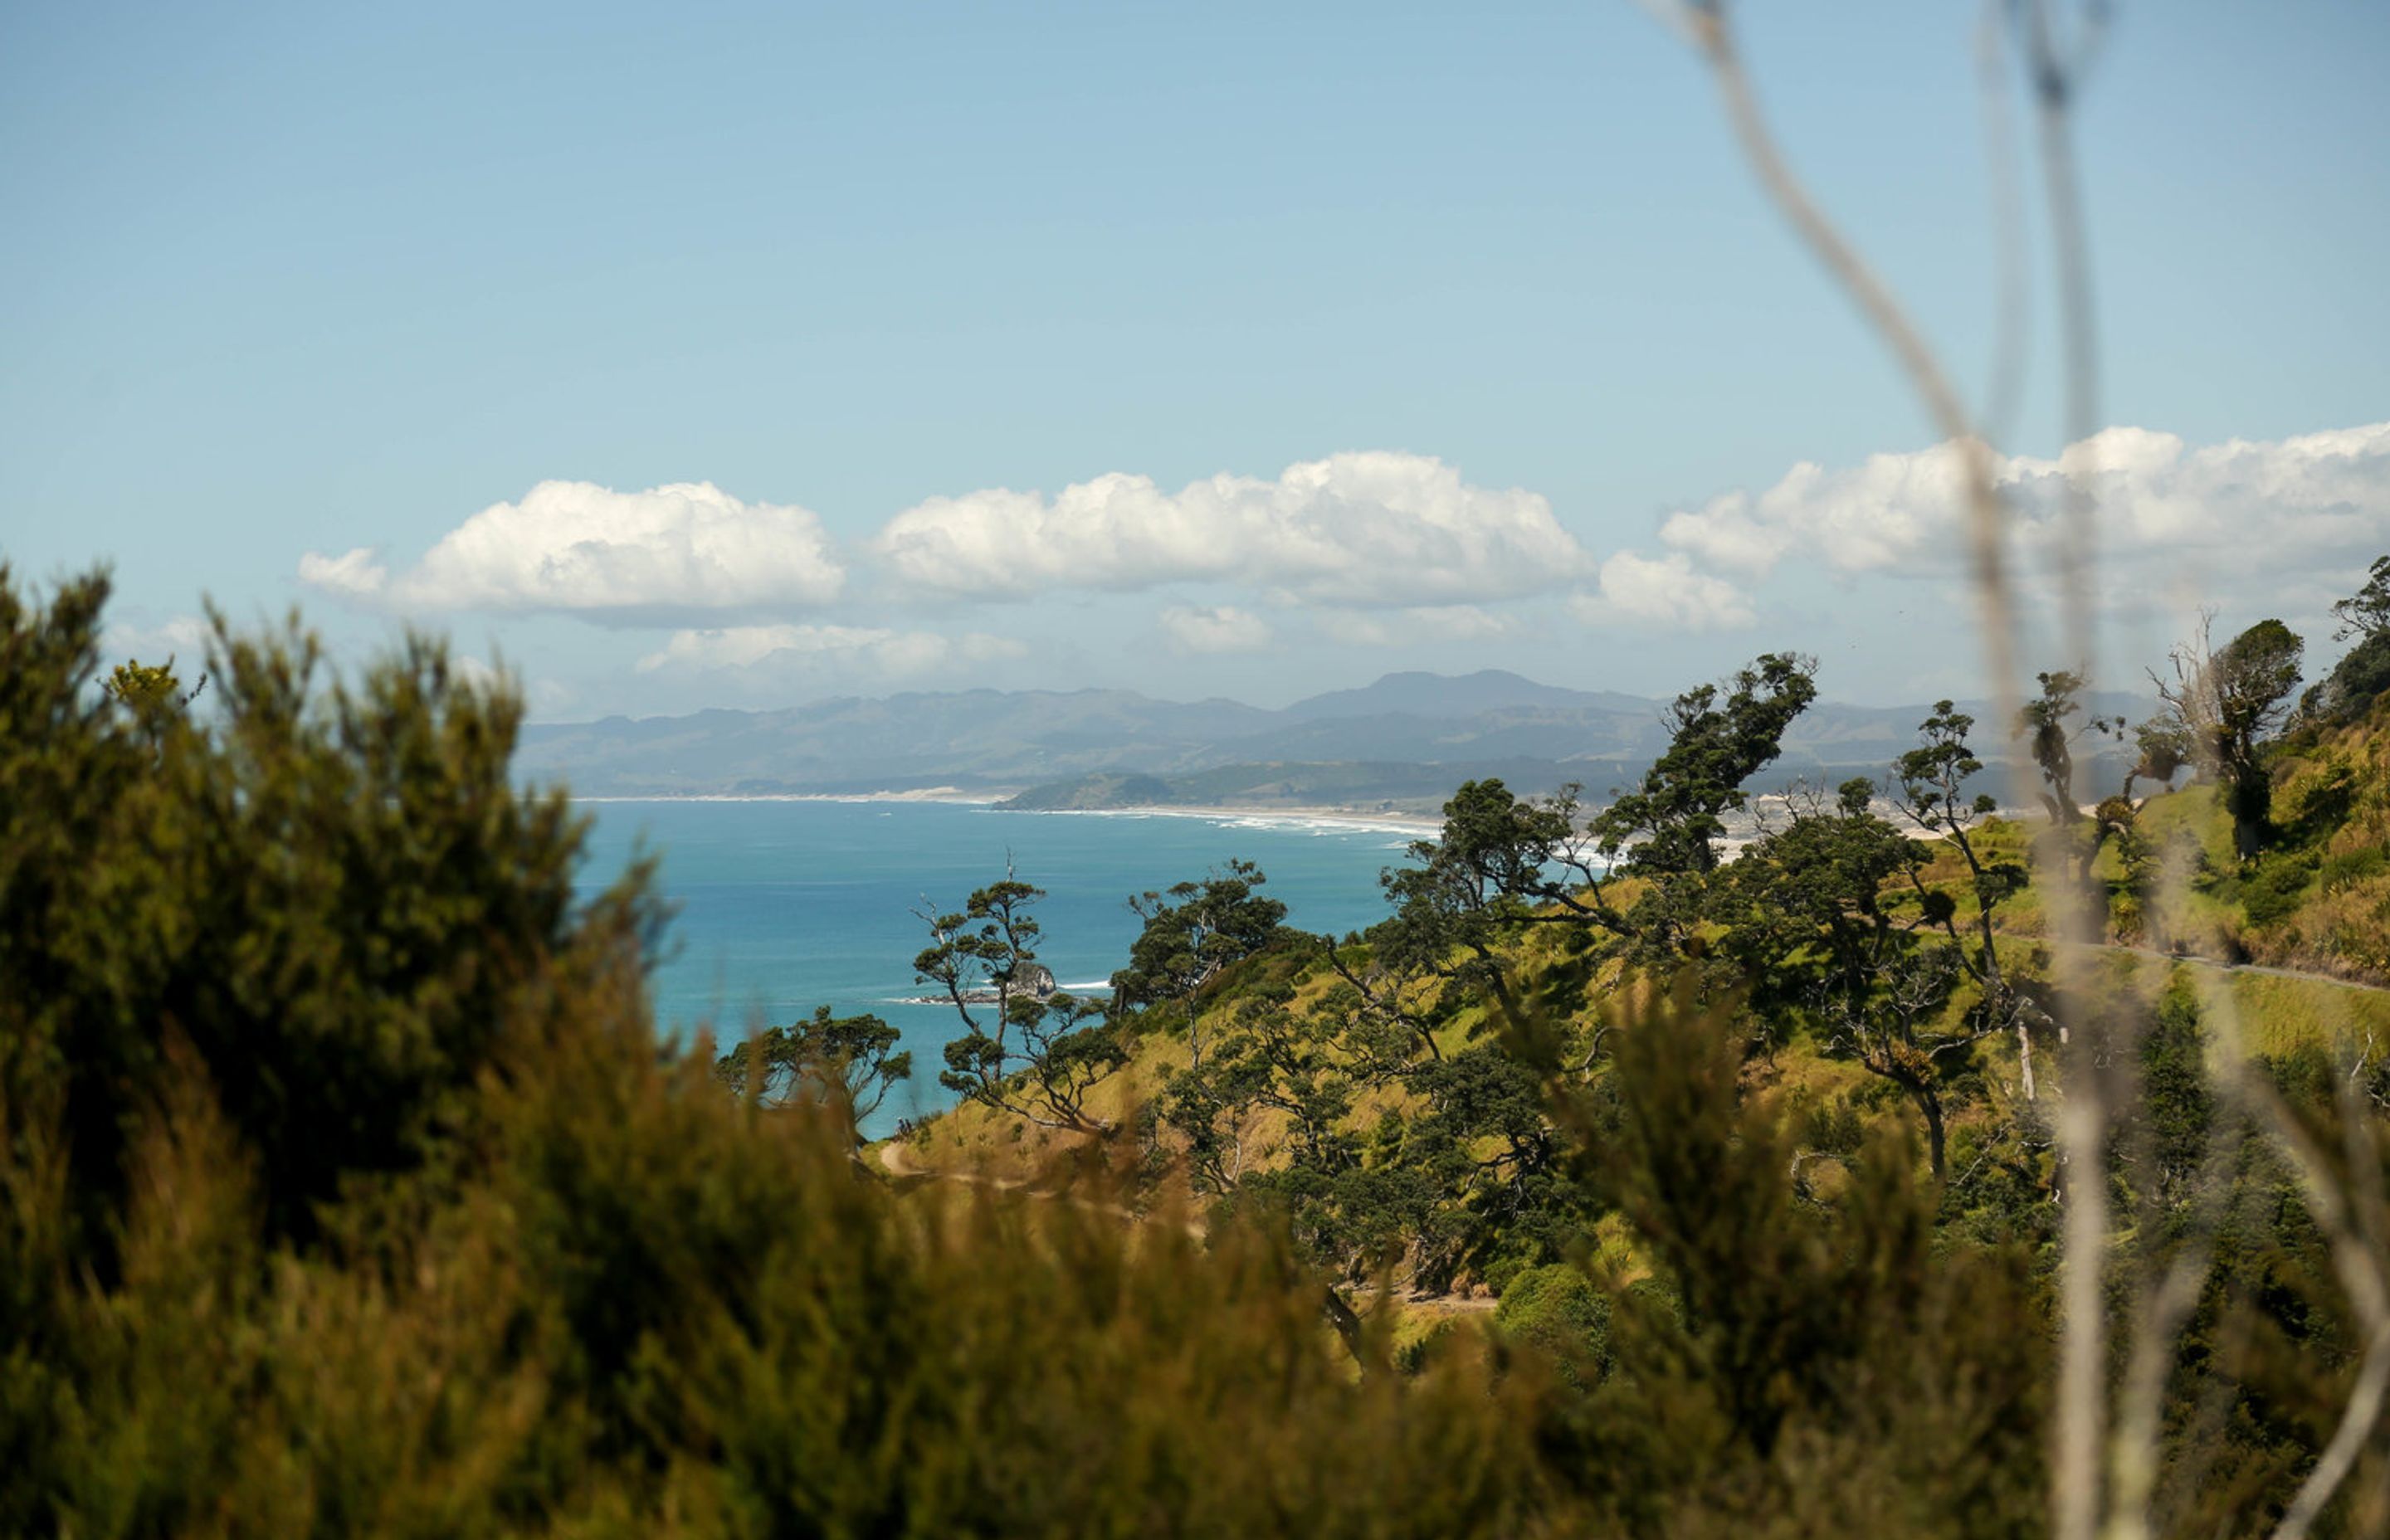 The view of Mangawhai from the top of the hill on the property.